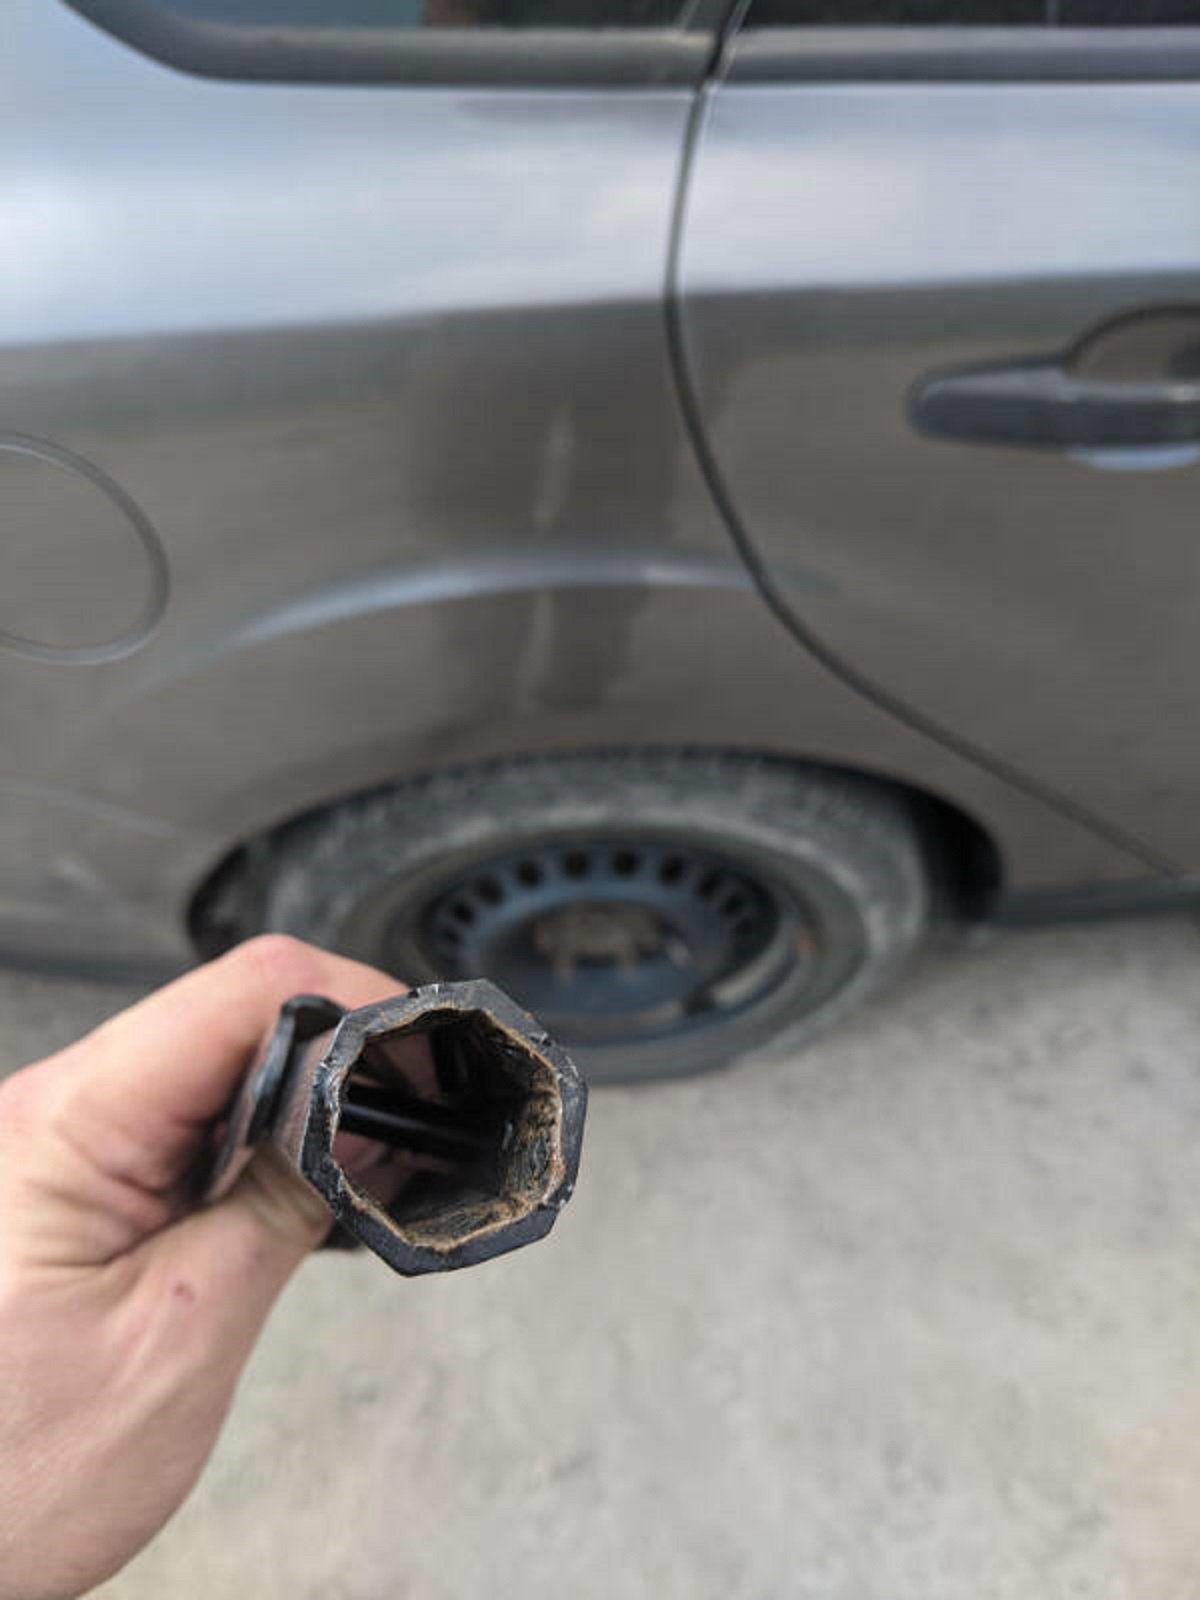 “Tire went flat. No problem. Except the socket decided to go pear shaped.”